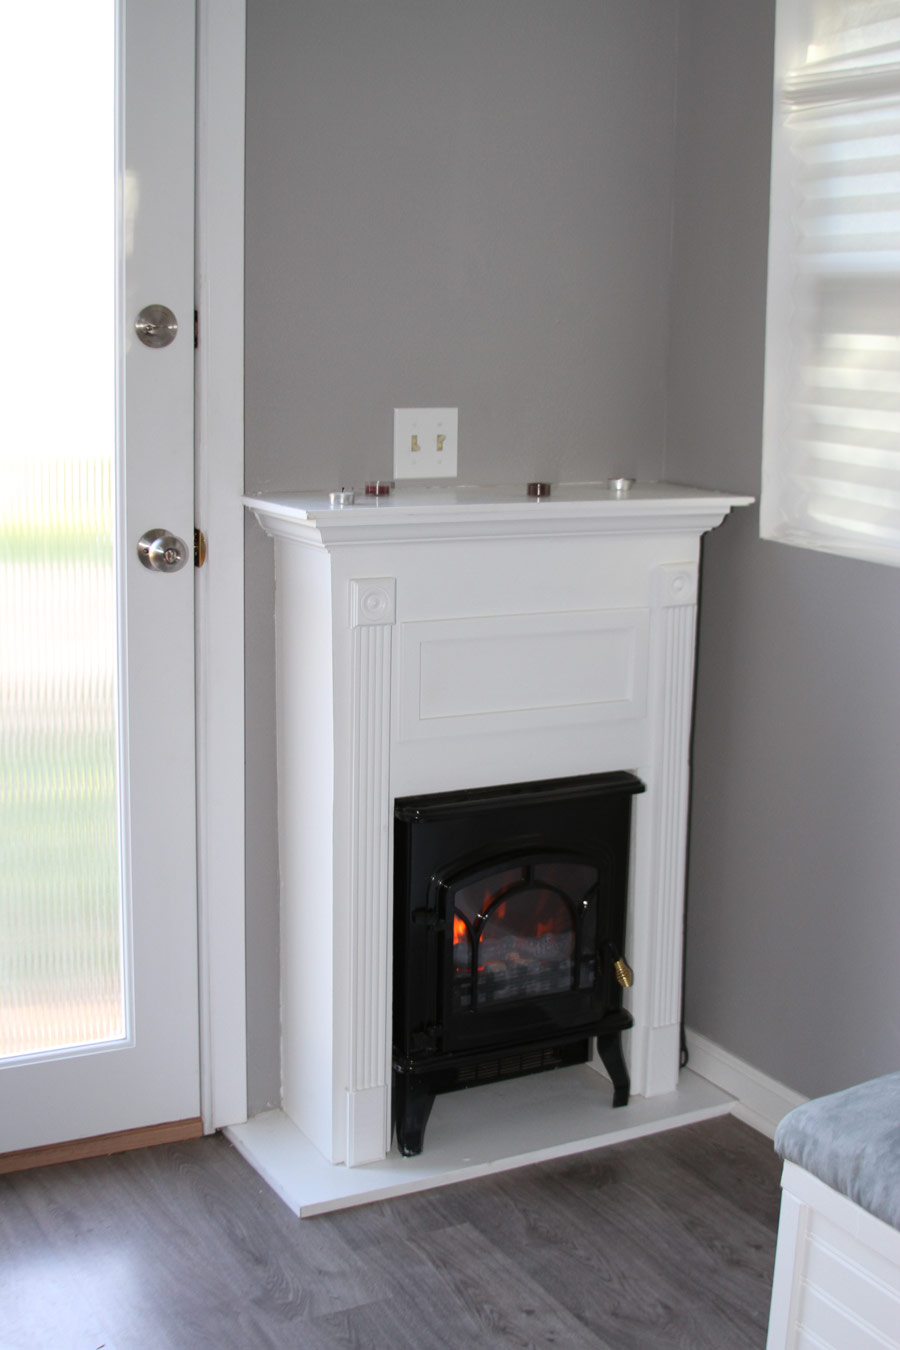 Electric Fireplace with Wood Mantel Inspirational Pin by Linda Wallace On Decorating Country Cottage In